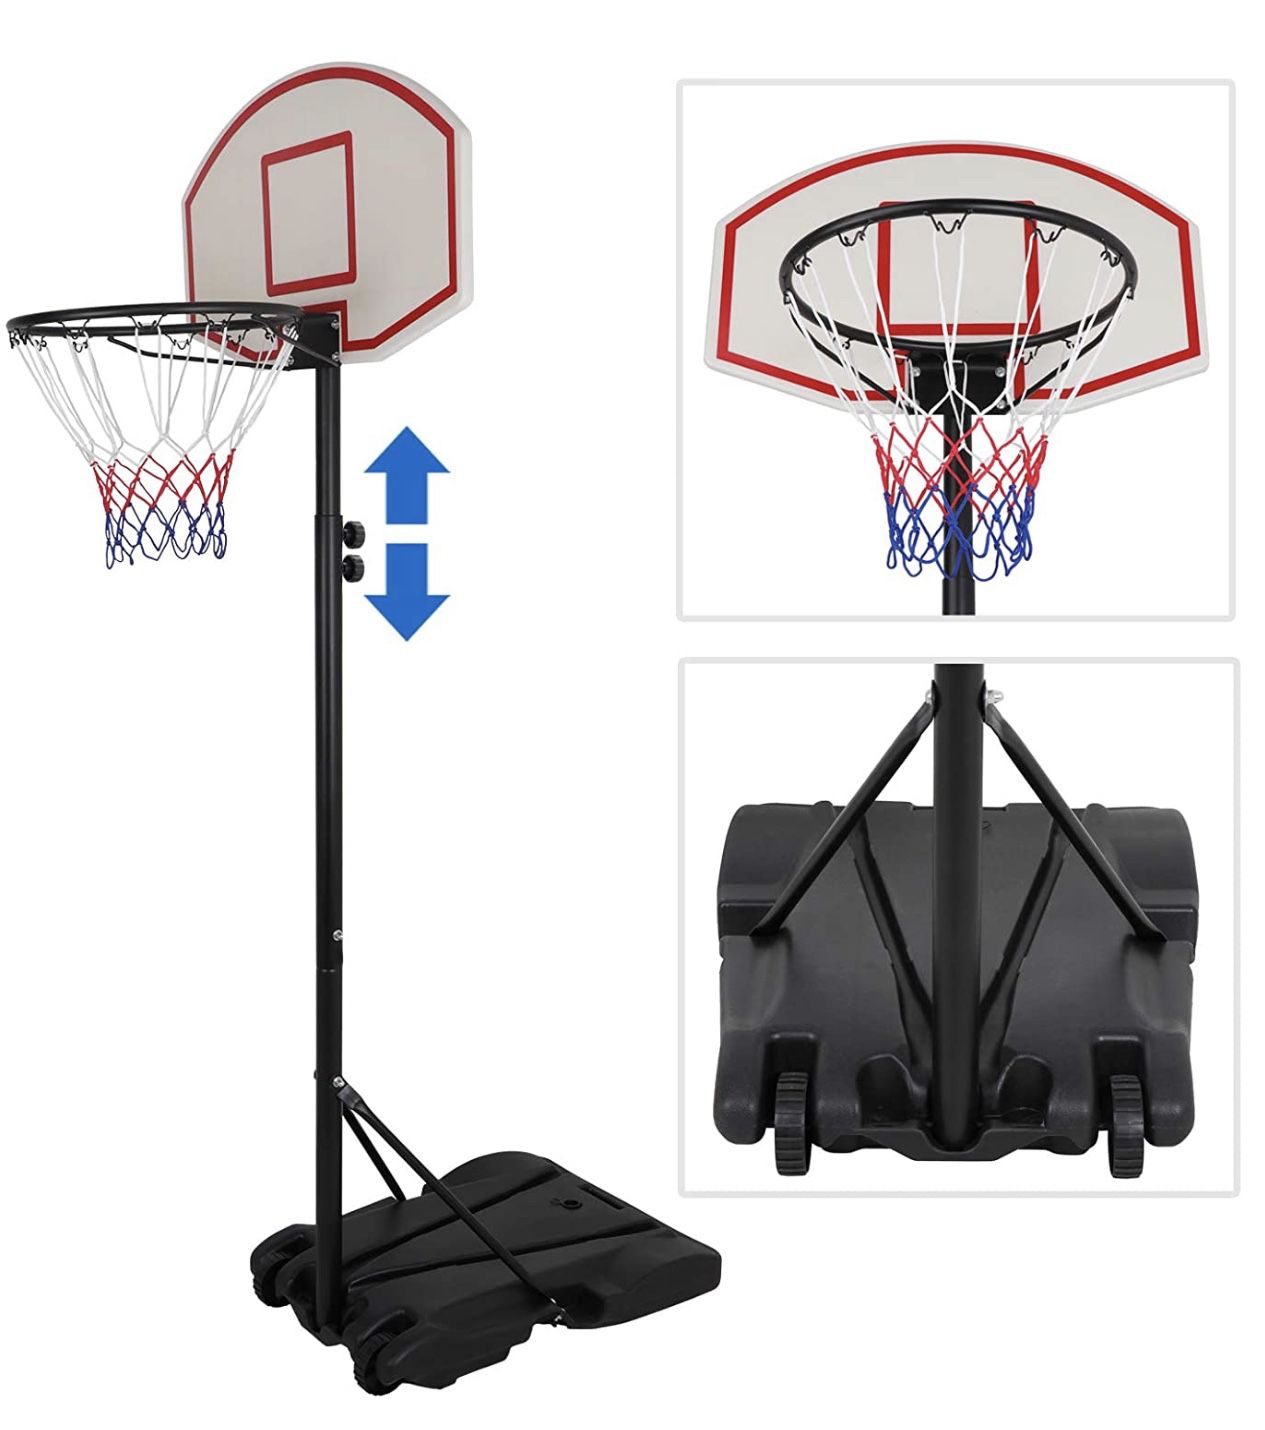 ZENY Portable Basketball Hoop Backboard System Stand and Rim for Kids Youth w/Wheels Adjustable Height 5.4ft - 7ft Indoor Outdoor Basketball Goal Gam